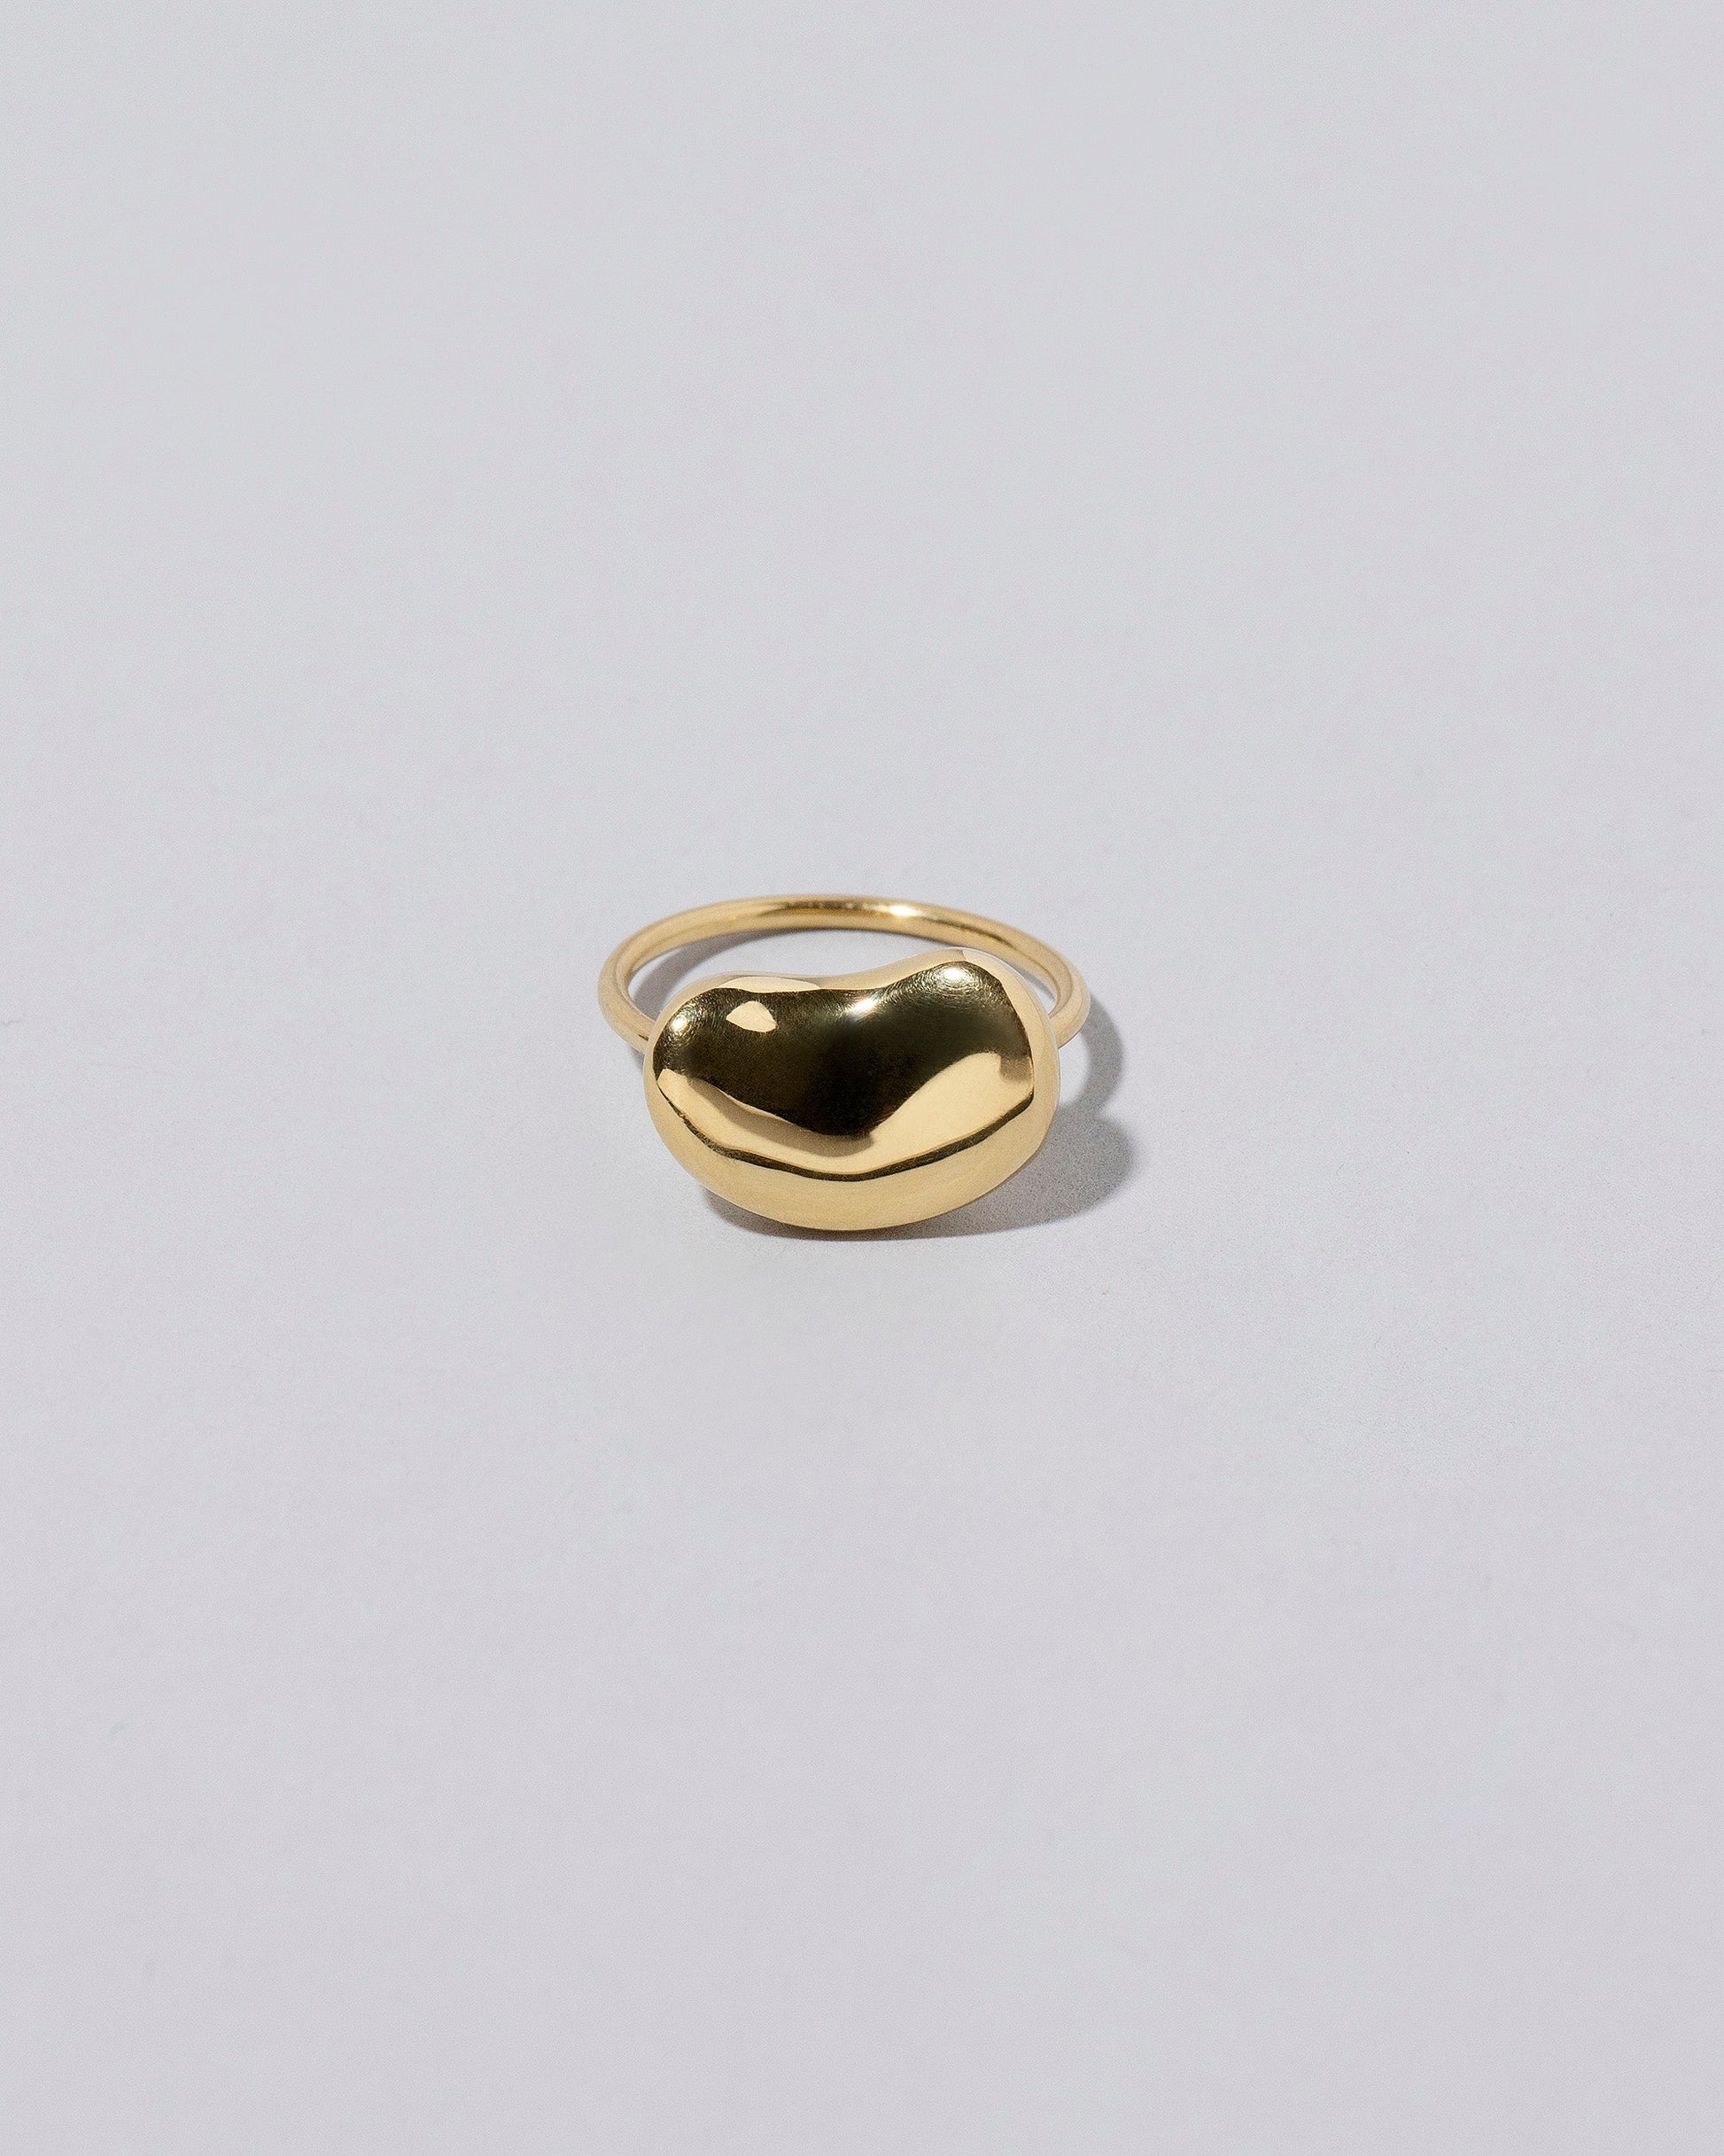 Tiffany & Co. Peretti Bean Ring on light colored background.